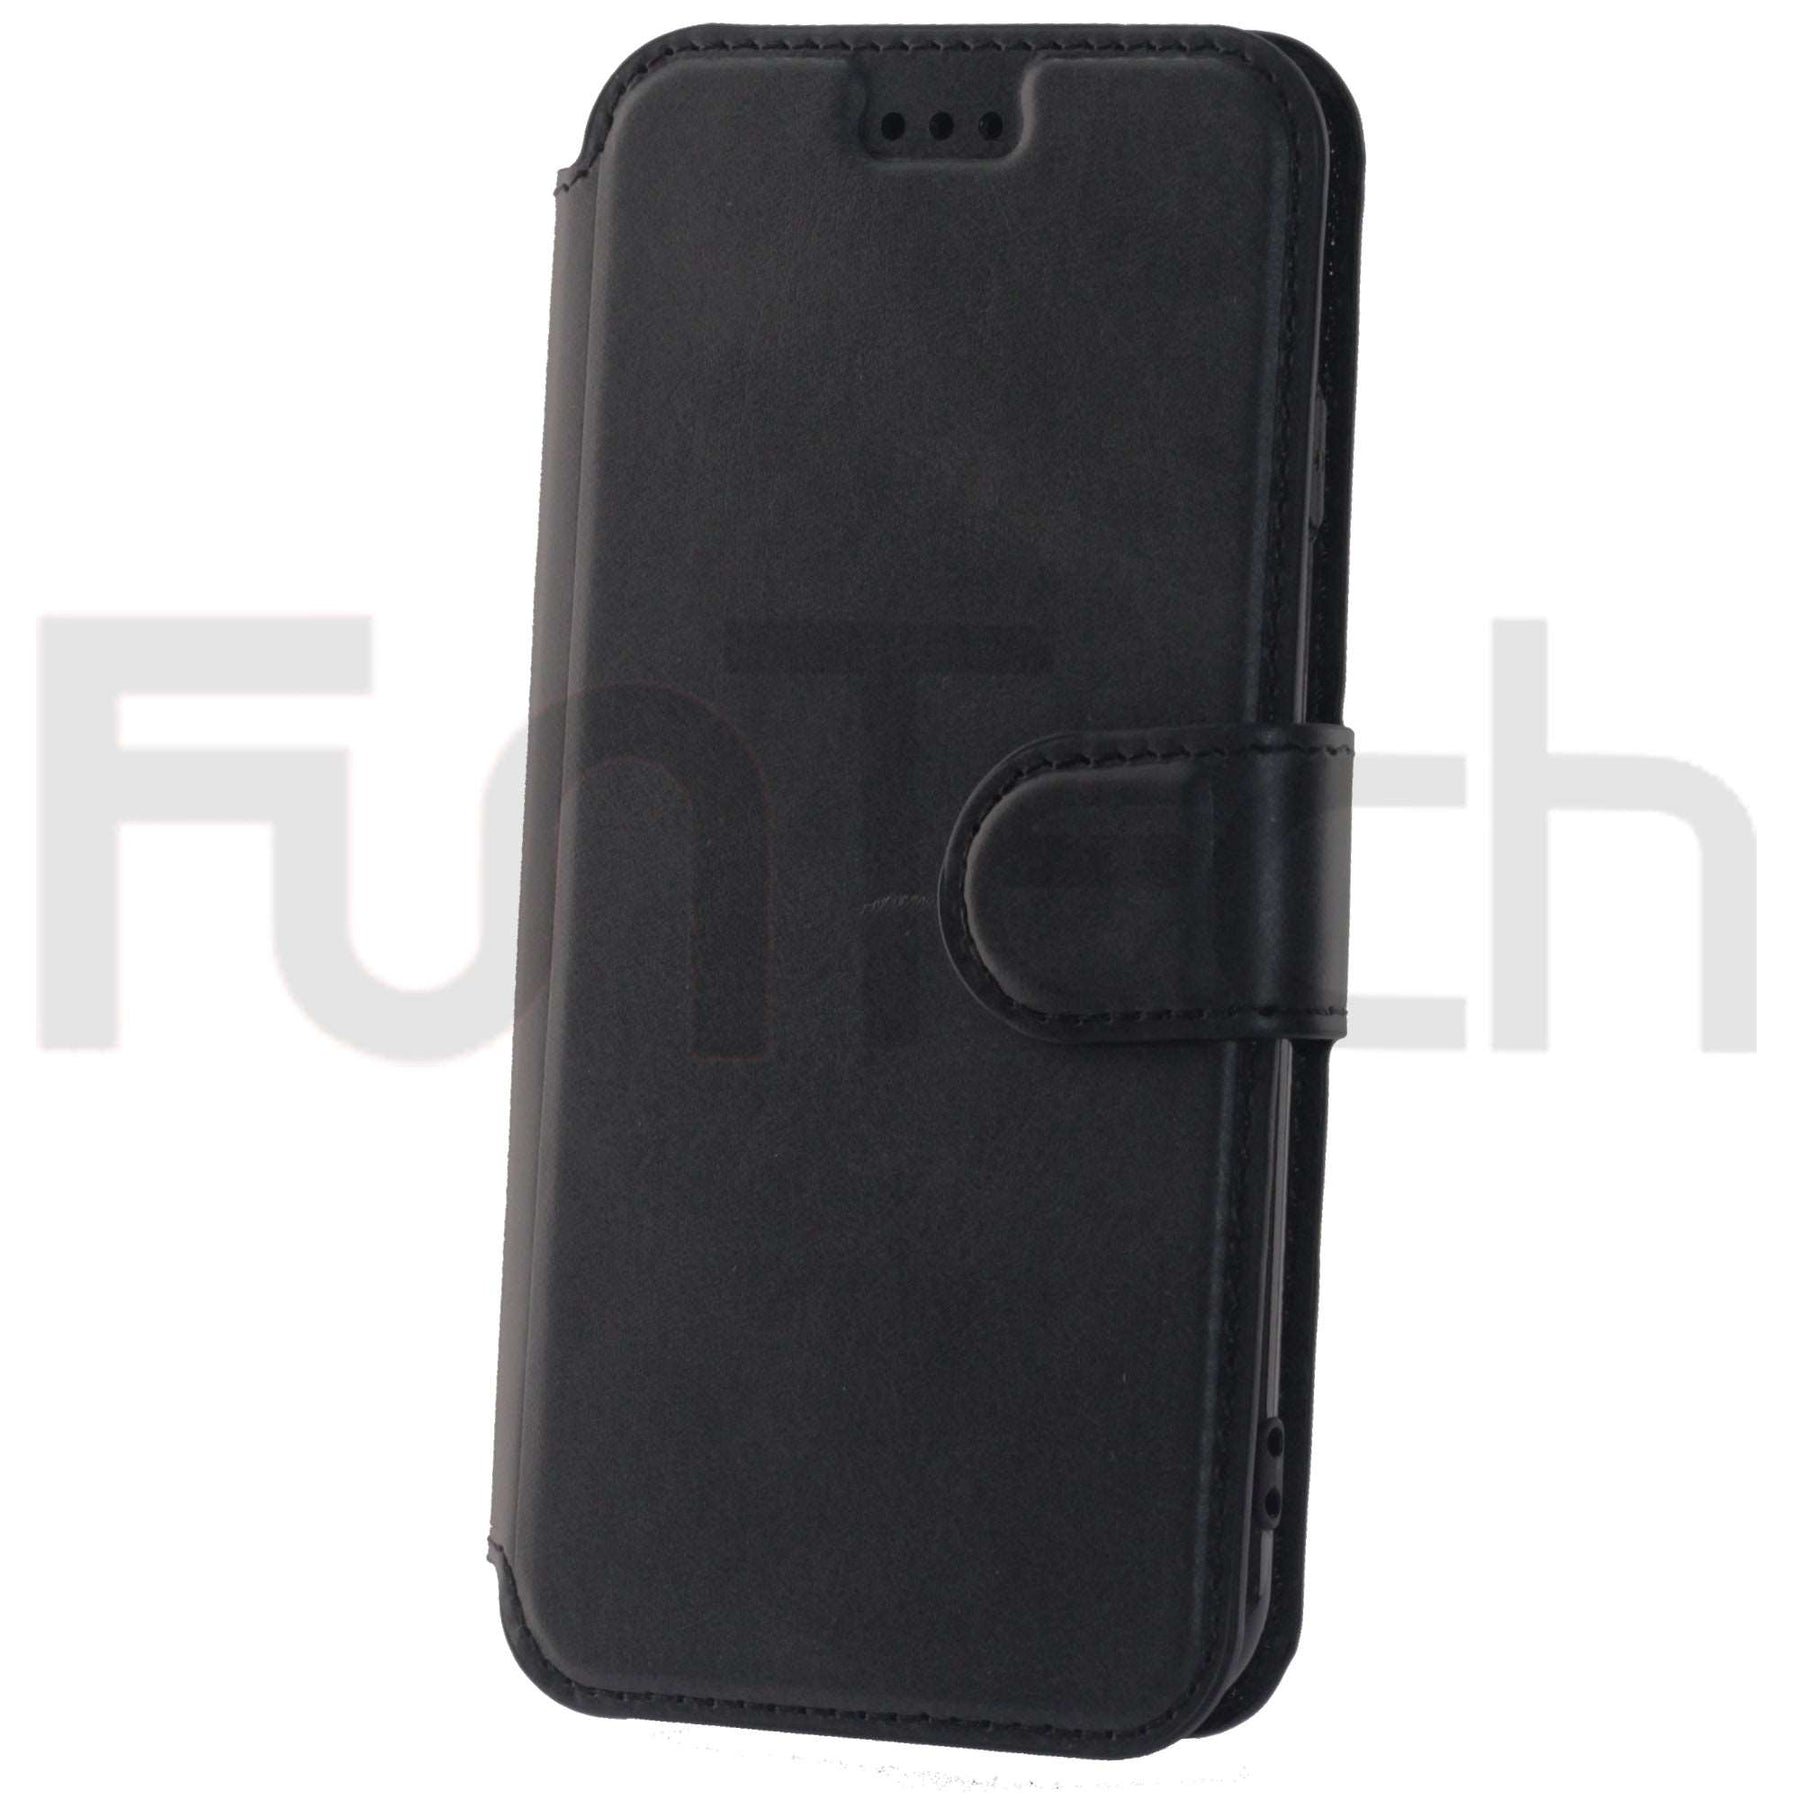 Copy of Apple, iPhone 6/6S, Leather Wallet Case, Color Black.